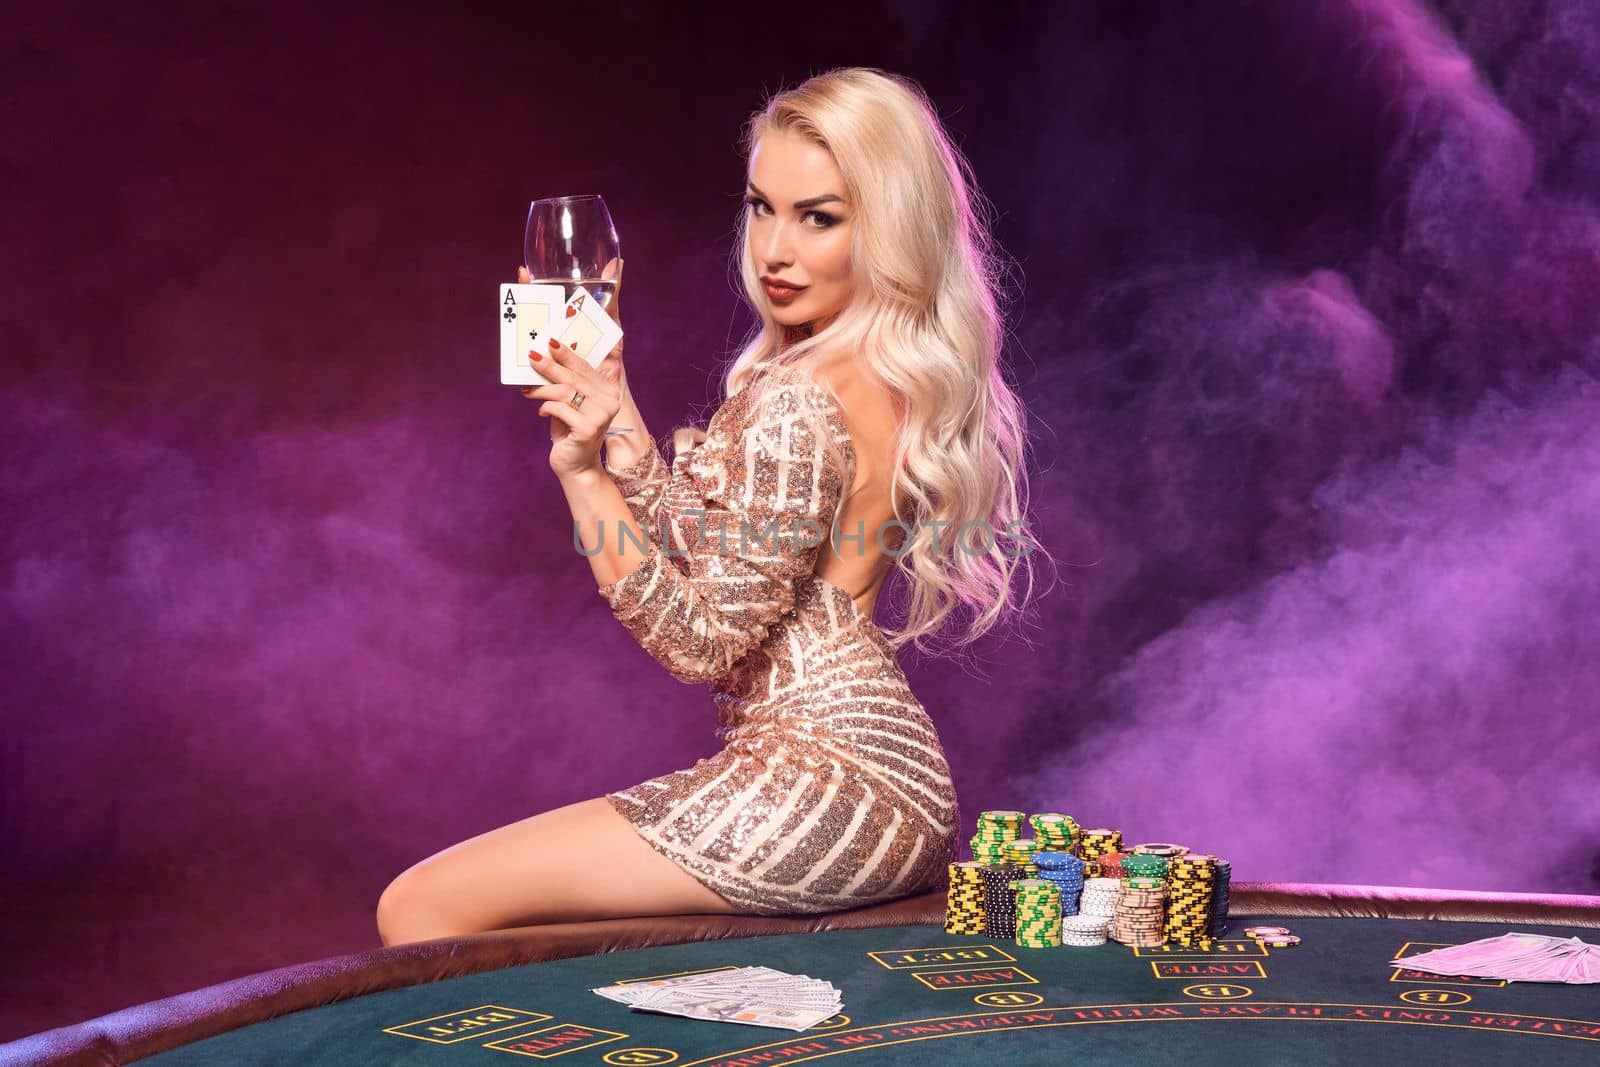 Close-up shot of a charming maiden with blond hair and bright make-up, dressed in a golden striped shiny dress, posing with two aces and glass of champagne in her hands while sitting on a table with chips on it. Poker concept on a black smoke background with pink and blue backlights. Casino.